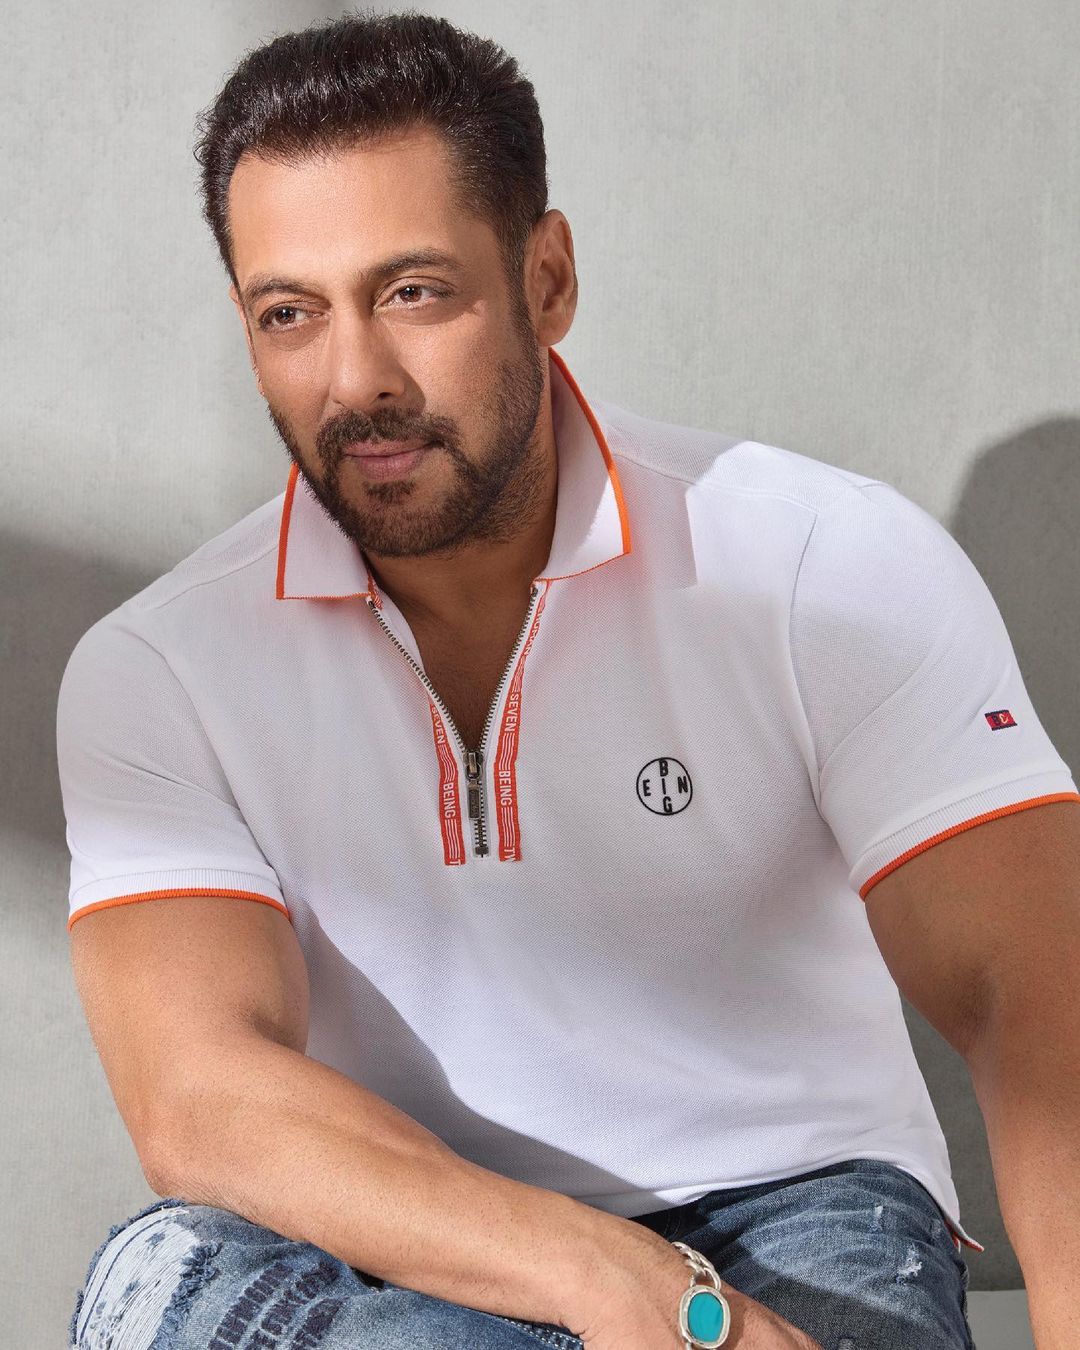 Salman Khan gifts his iconic lucky charm bracelet to Aamir Khan fans  say it means collab confirmed